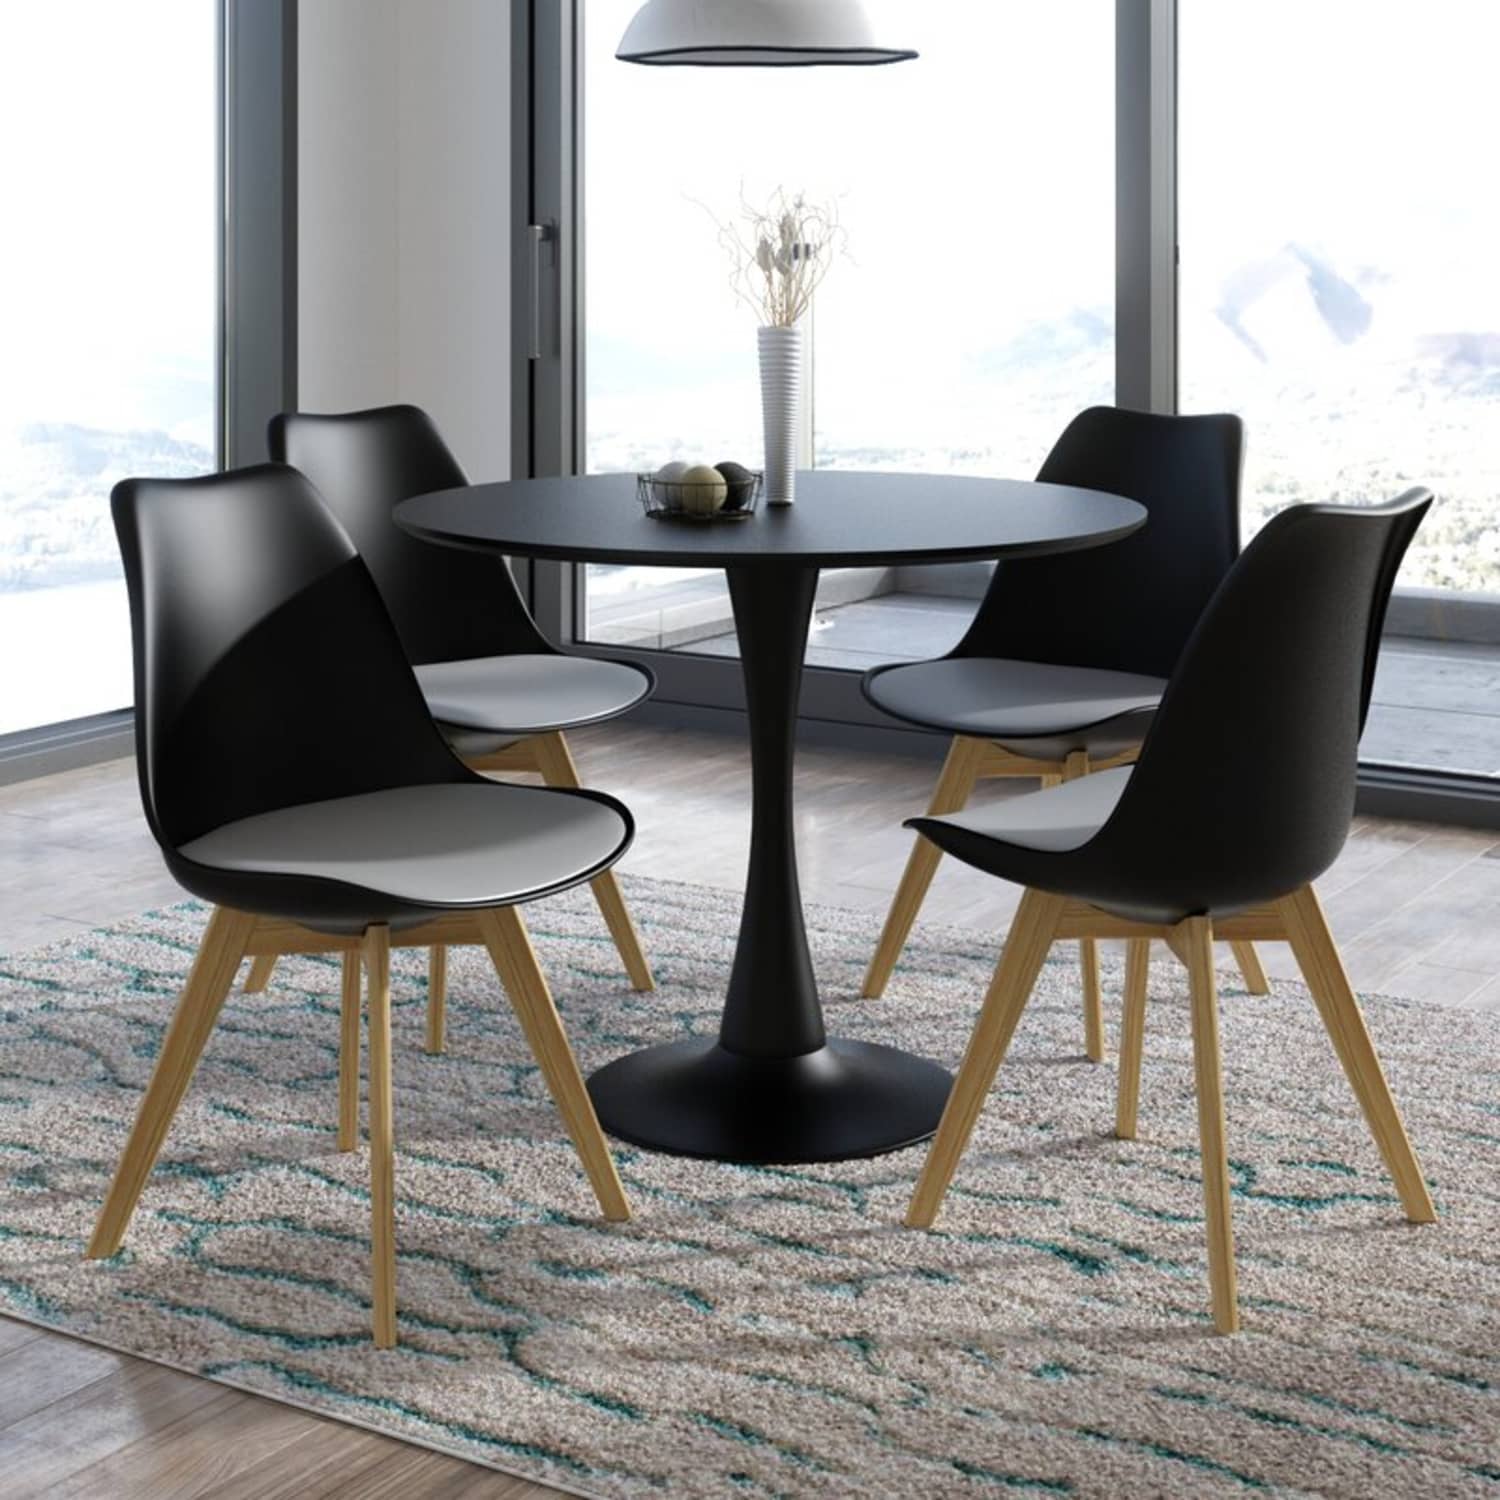 6 Tulip Tables Like Saarinen's But Cheaper, From Ikea & More | Apartment  Therapy